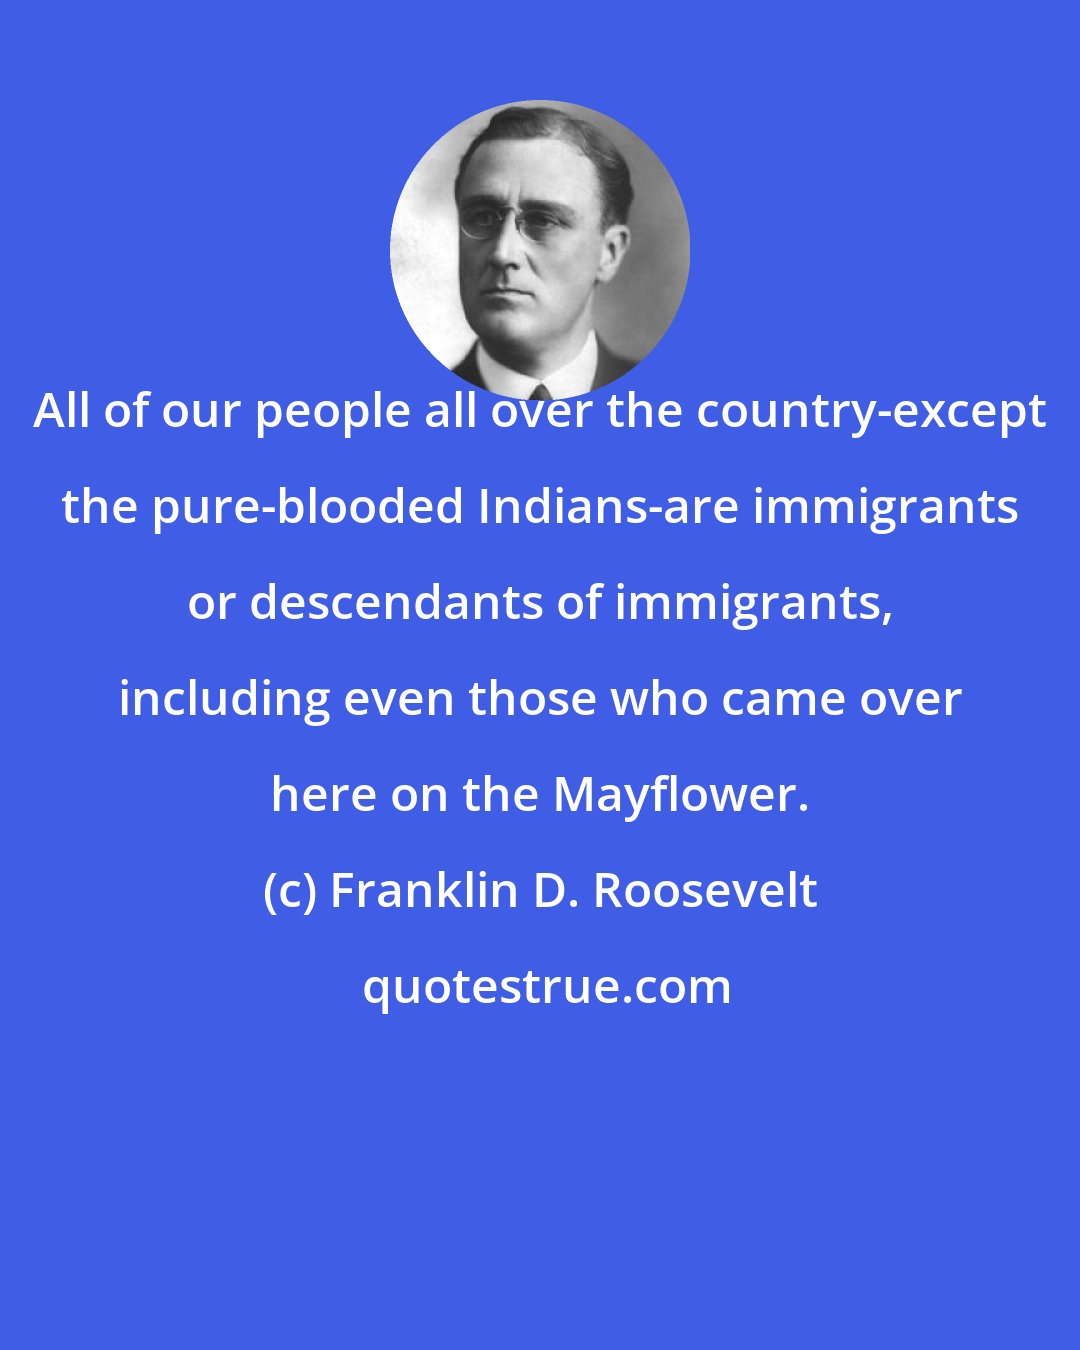 Franklin D. Roosevelt: All of our people all over the country-except the pure-blooded Indians-are immigrants or descendants of immigrants, including even those who came over here on the Mayflower.